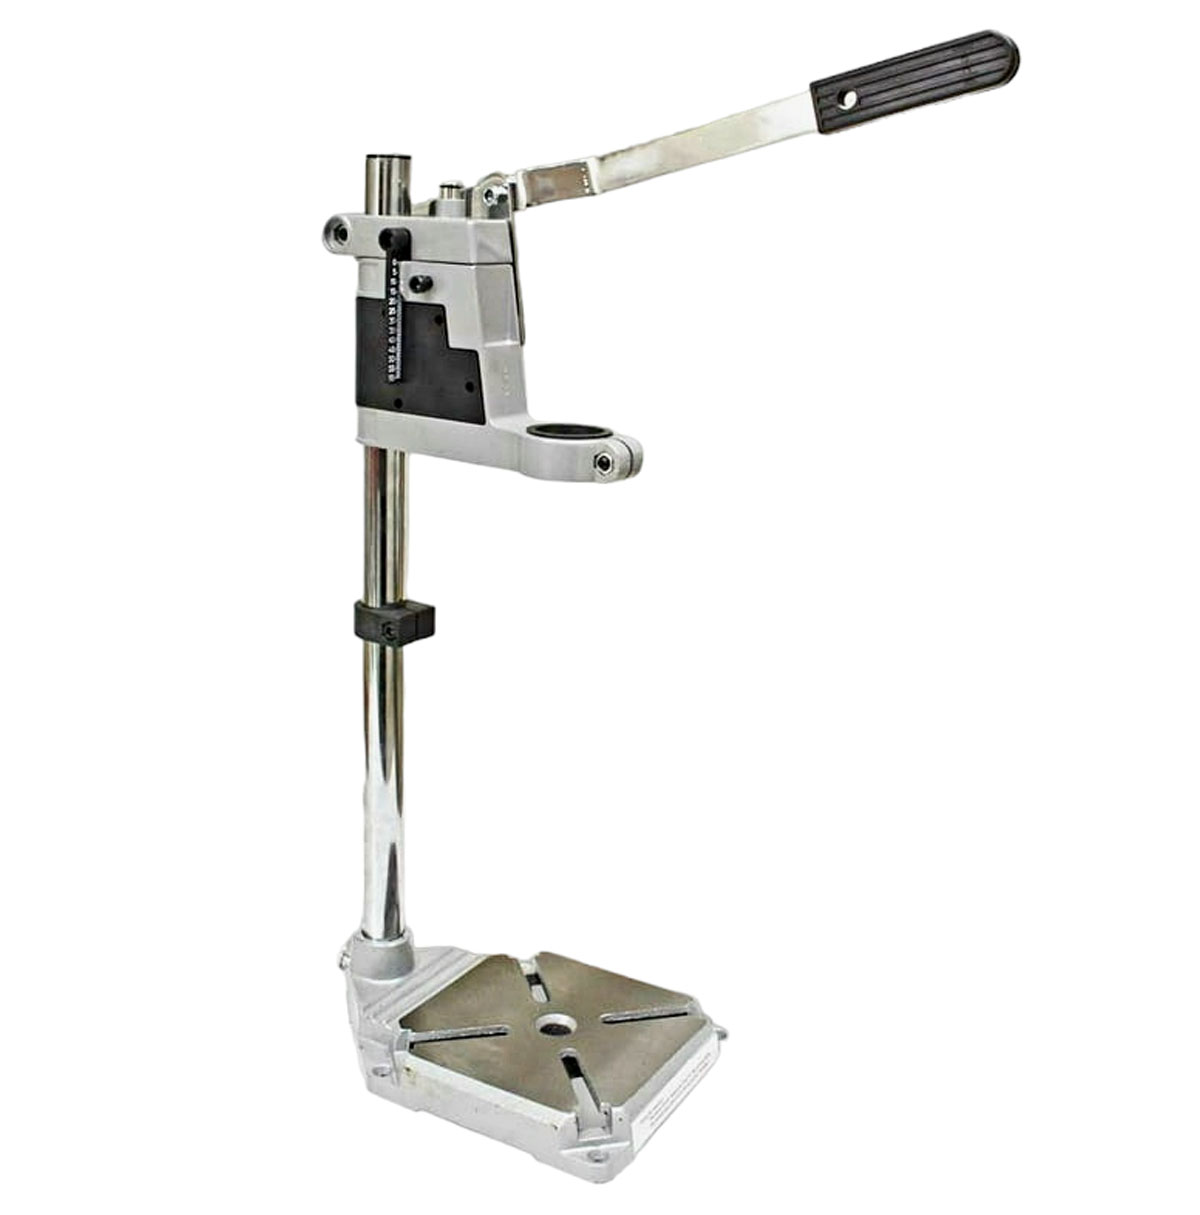 Universal Bench Clamp Drill Press Stand for Workbench Repair Tool